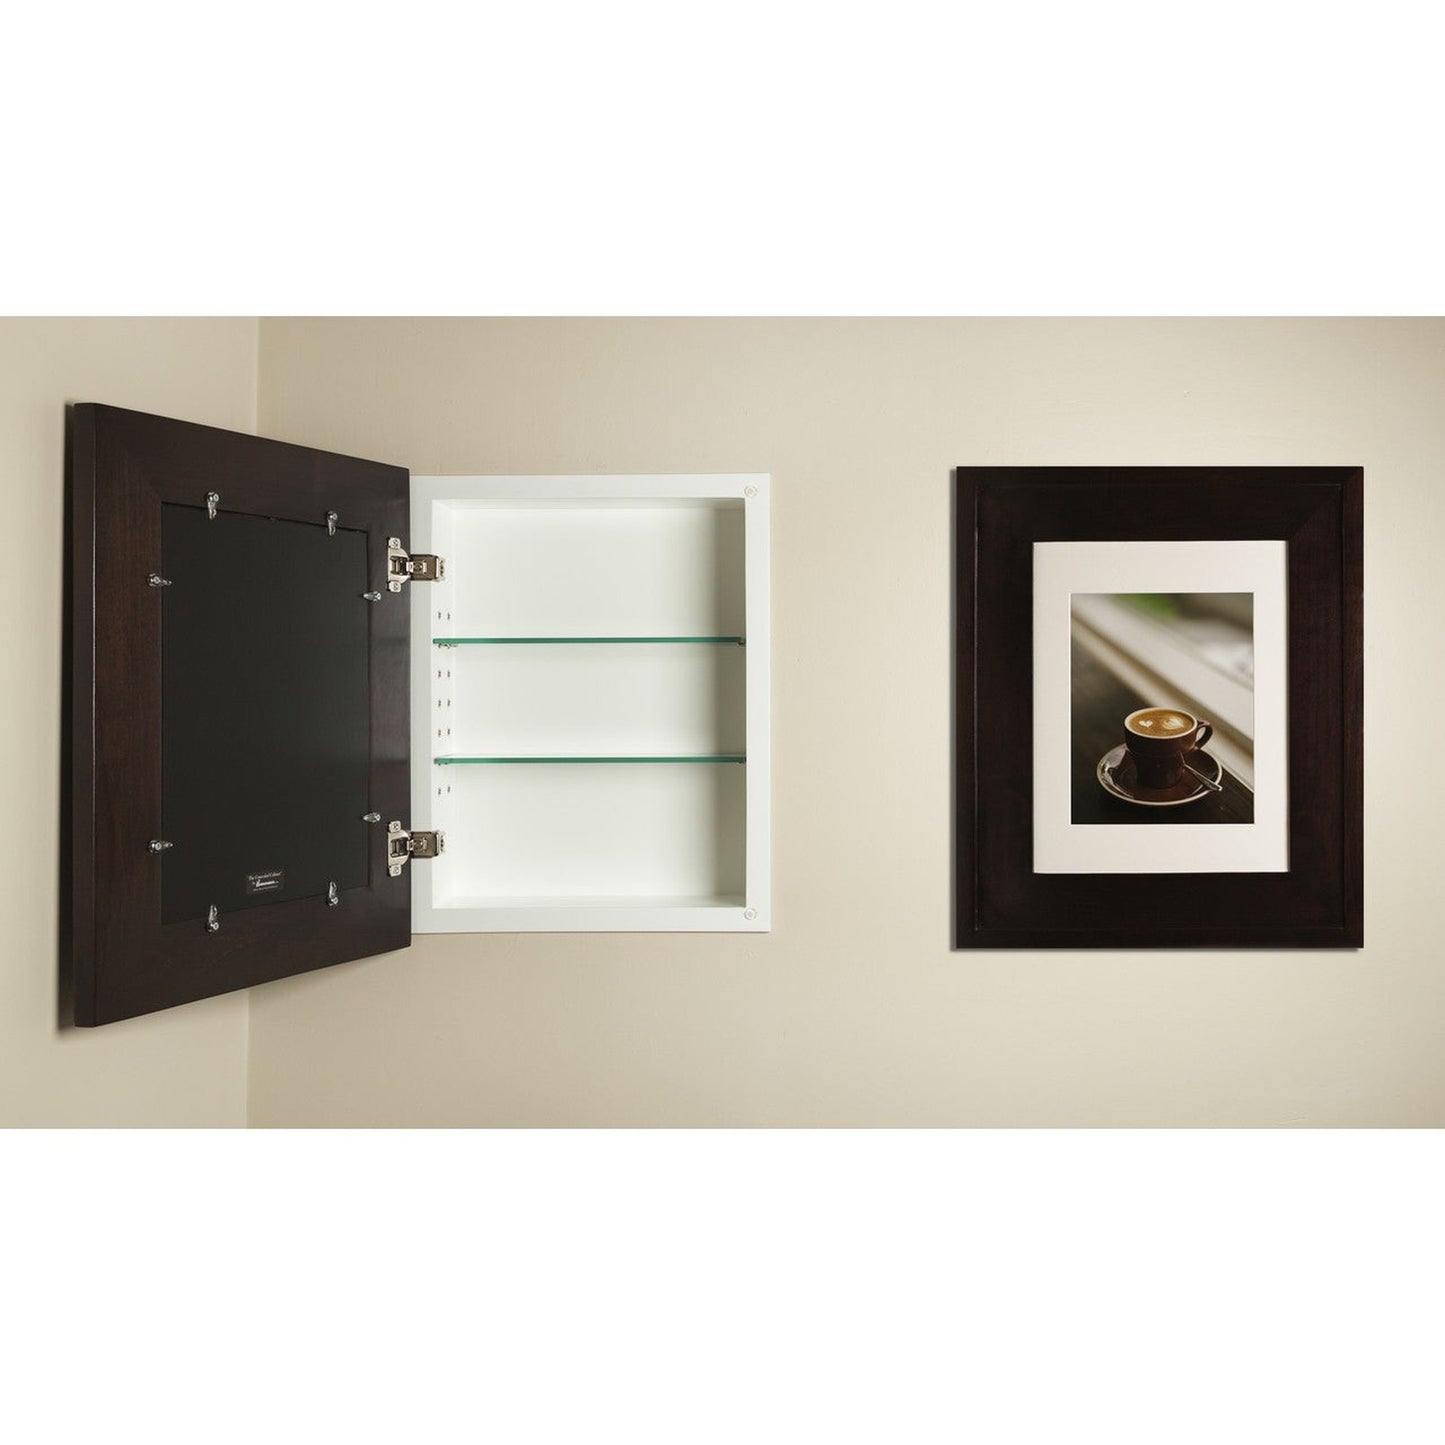 Fox Hollow Furnishings 14" x 16" Coffee Bean Regular Special 3" Depth Recessed Picture Frame Medicine Cabinet With Mirror and White Matting